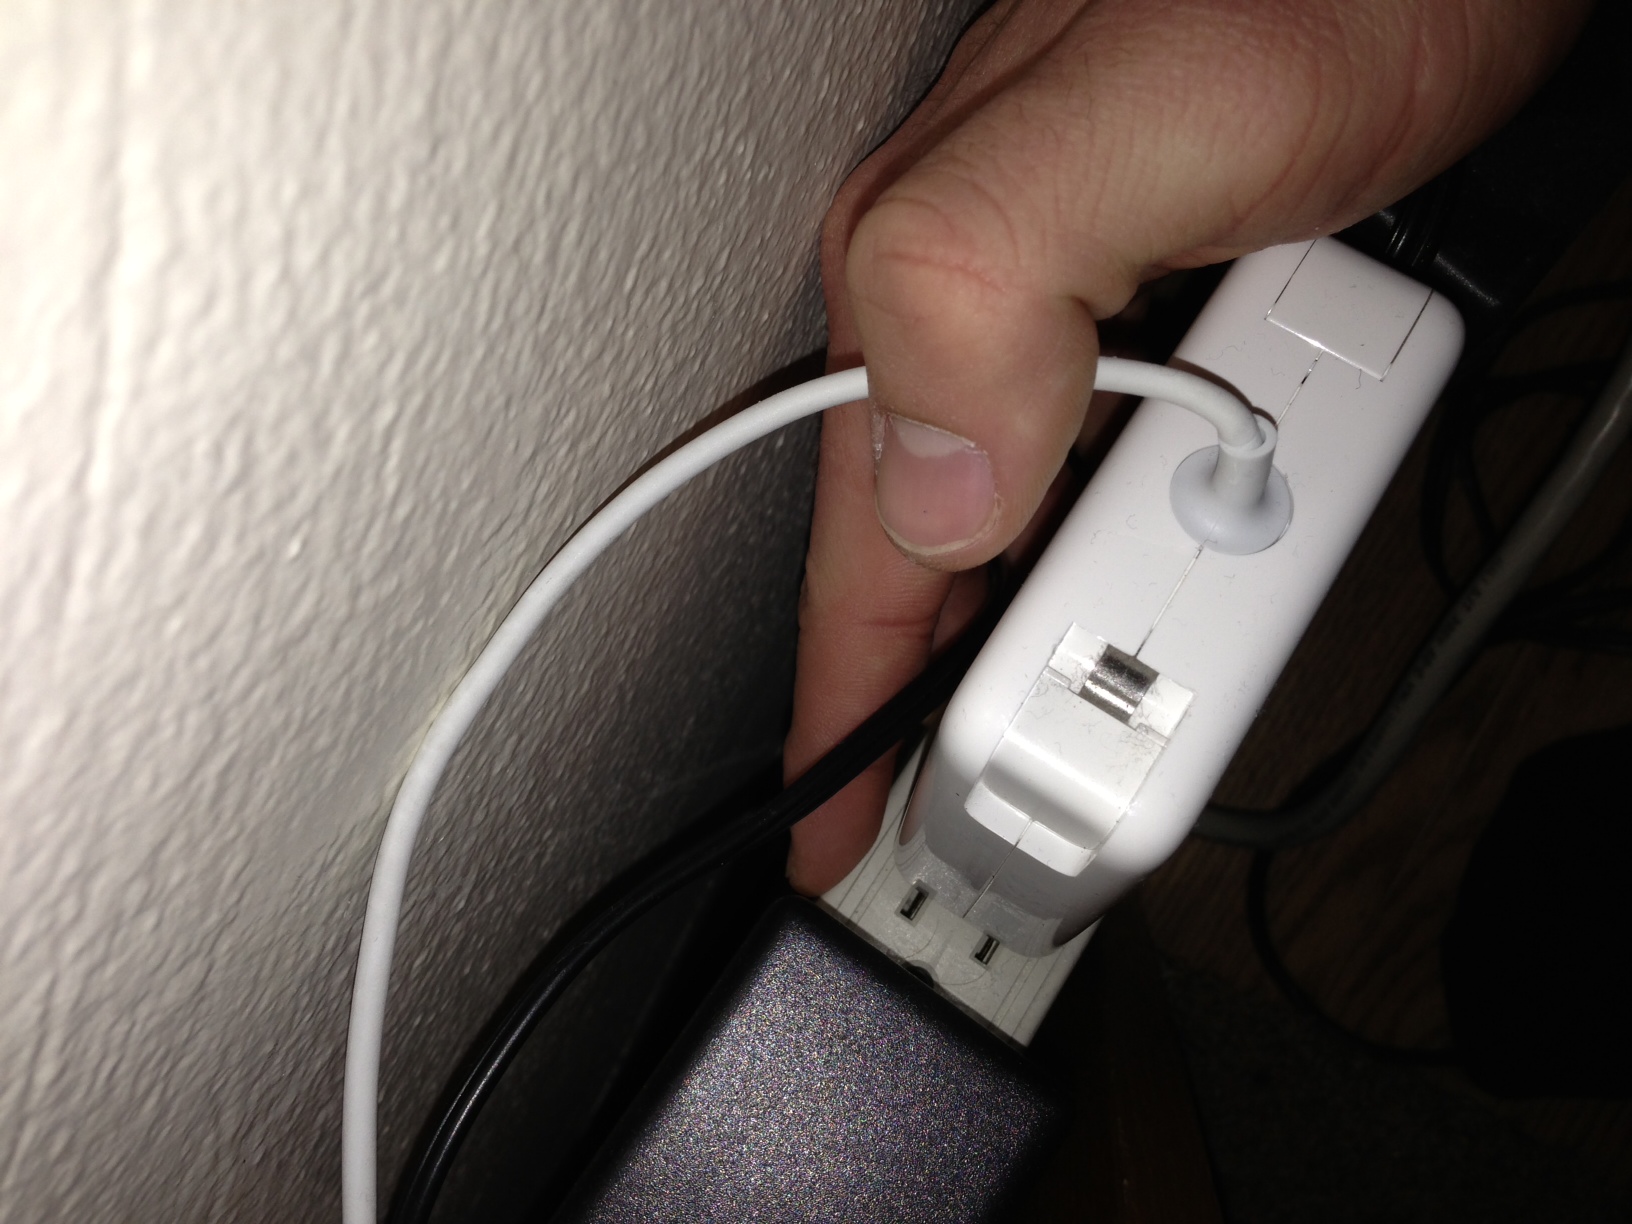 Sult gå i stå procent Broke Tab On MBP Charger, Can it Be Fixed? | MacRumors Forums